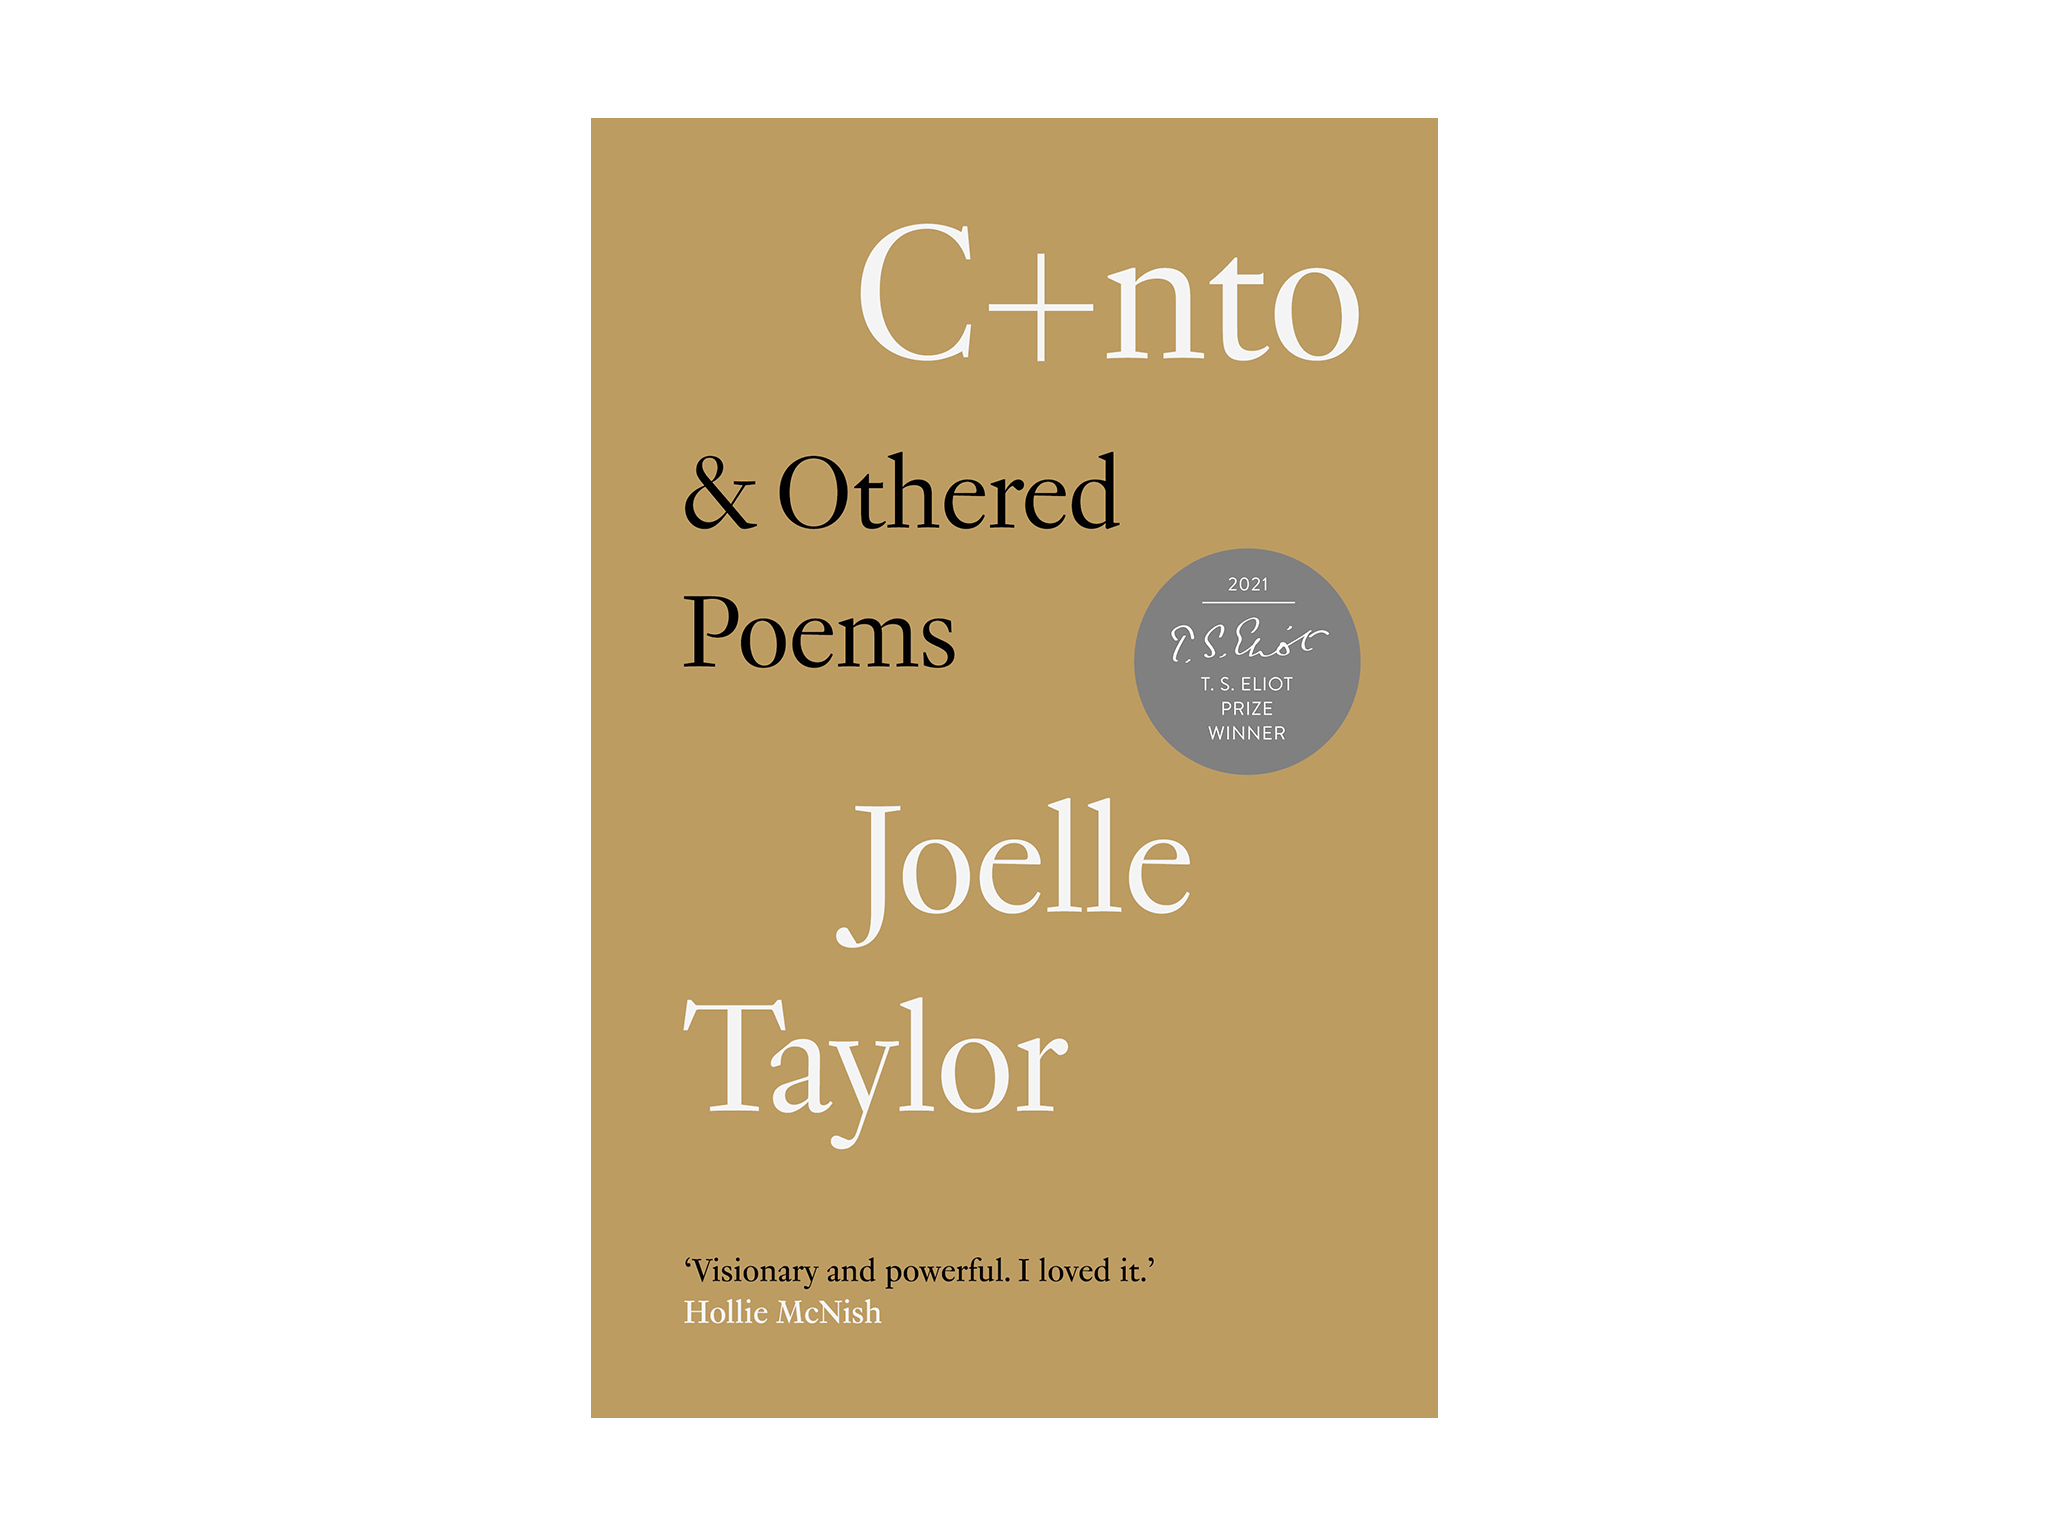 'C+nto & Othered Poems’ by Joelle Taylor, published by Saqi Books.png